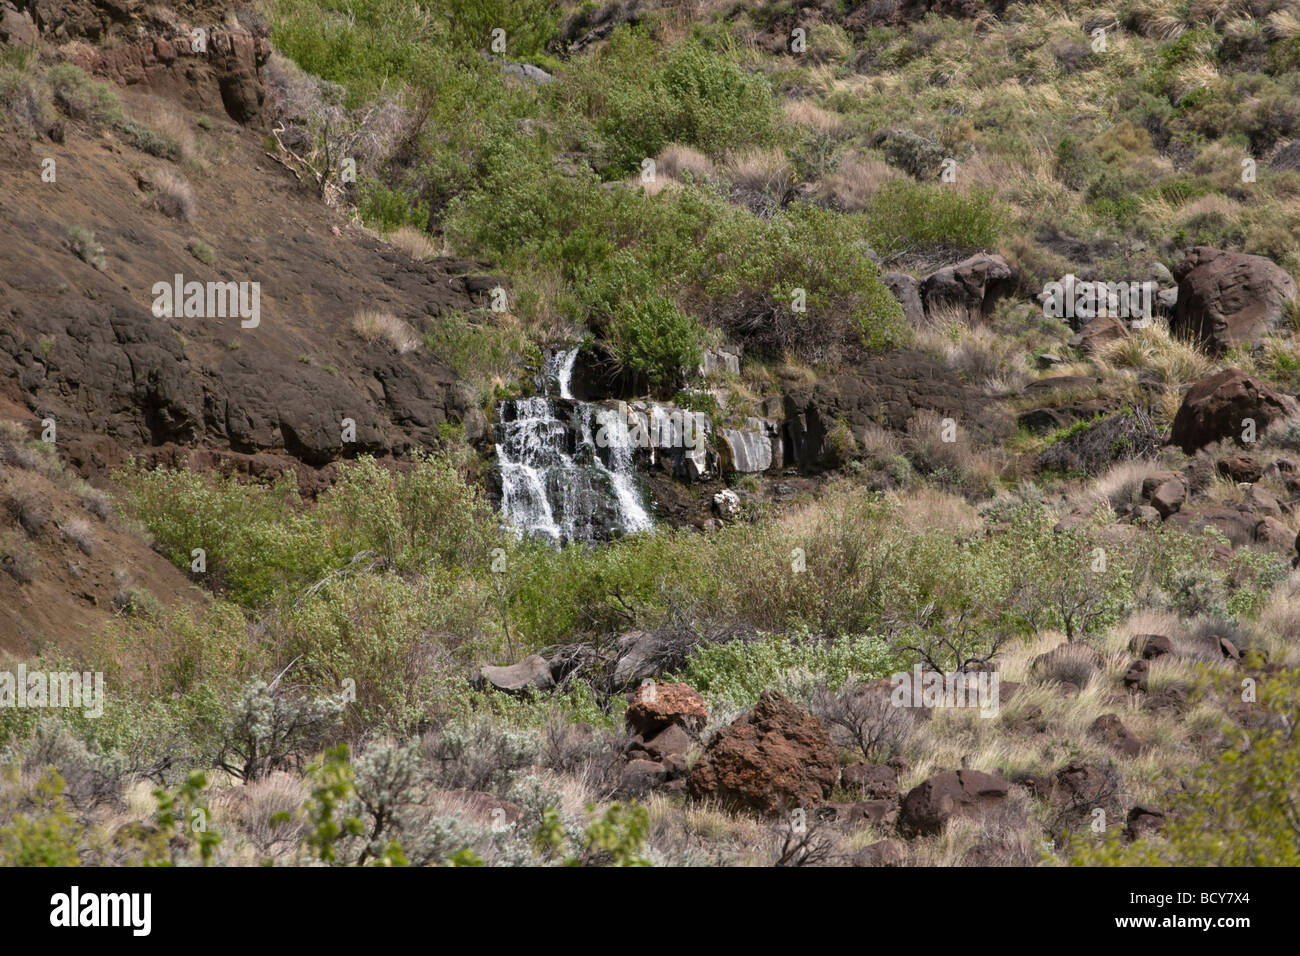 A CREEK runs through chaparral in the wild and scenic OWYHEE RIVER gorge EASTERN OREGON Stock Photo